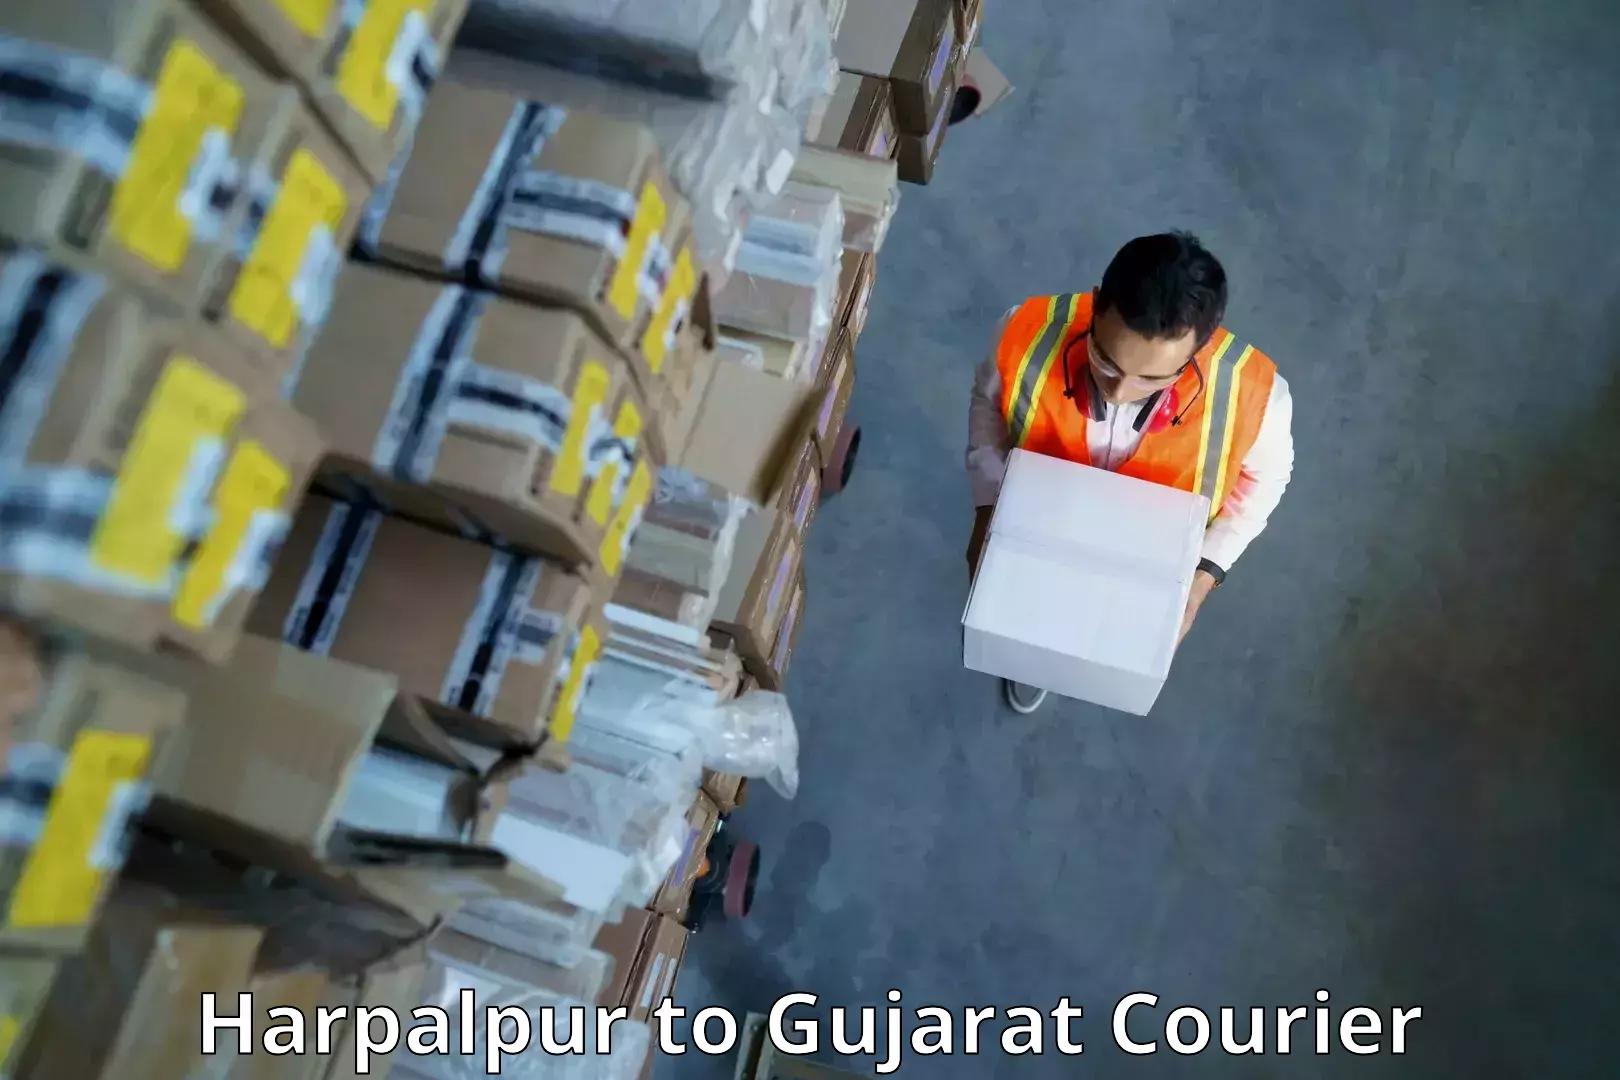 Reliable delivery network Harpalpur to Mundra